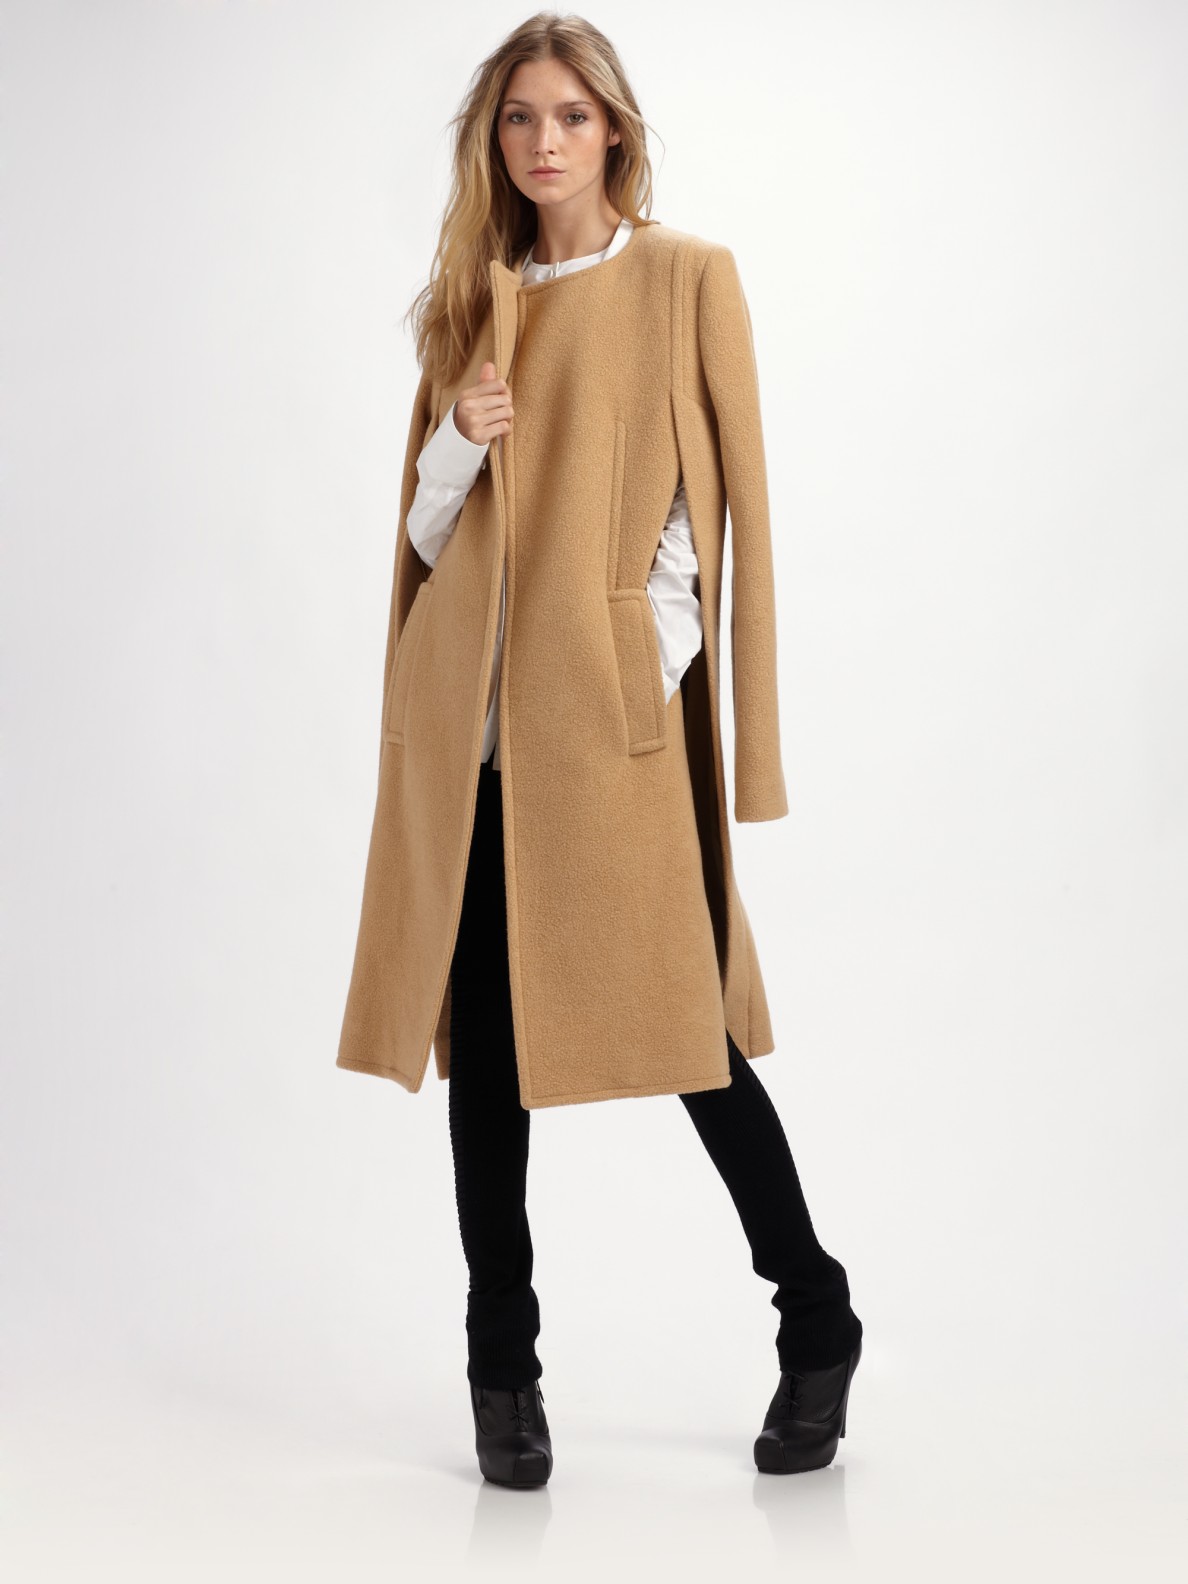 Alexander wang Nubby Wool Coat-cape in Natural | Lyst